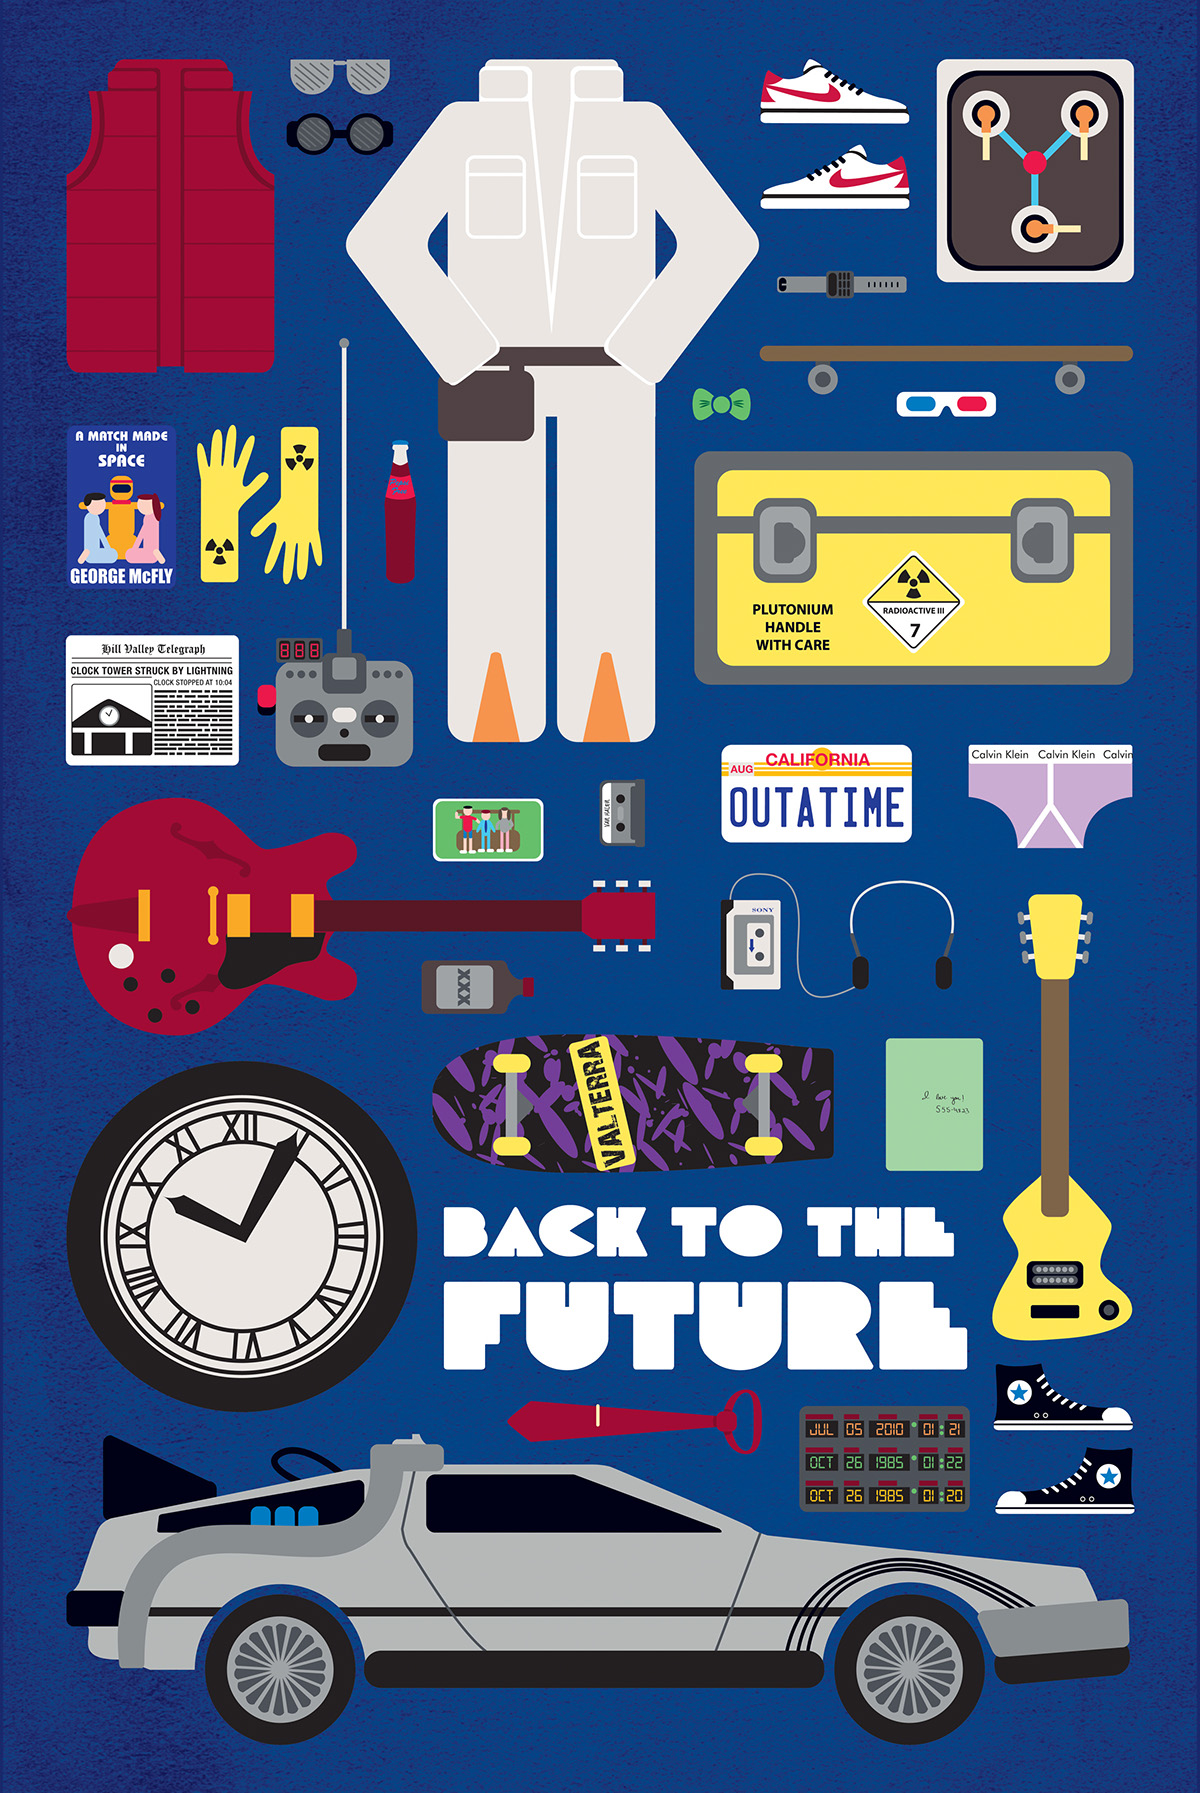 back to the future Top Gun Nike poster props MEMORABLE cartoon color mighty ducks forrest gump movie Movies films juno anchorman jurassic park